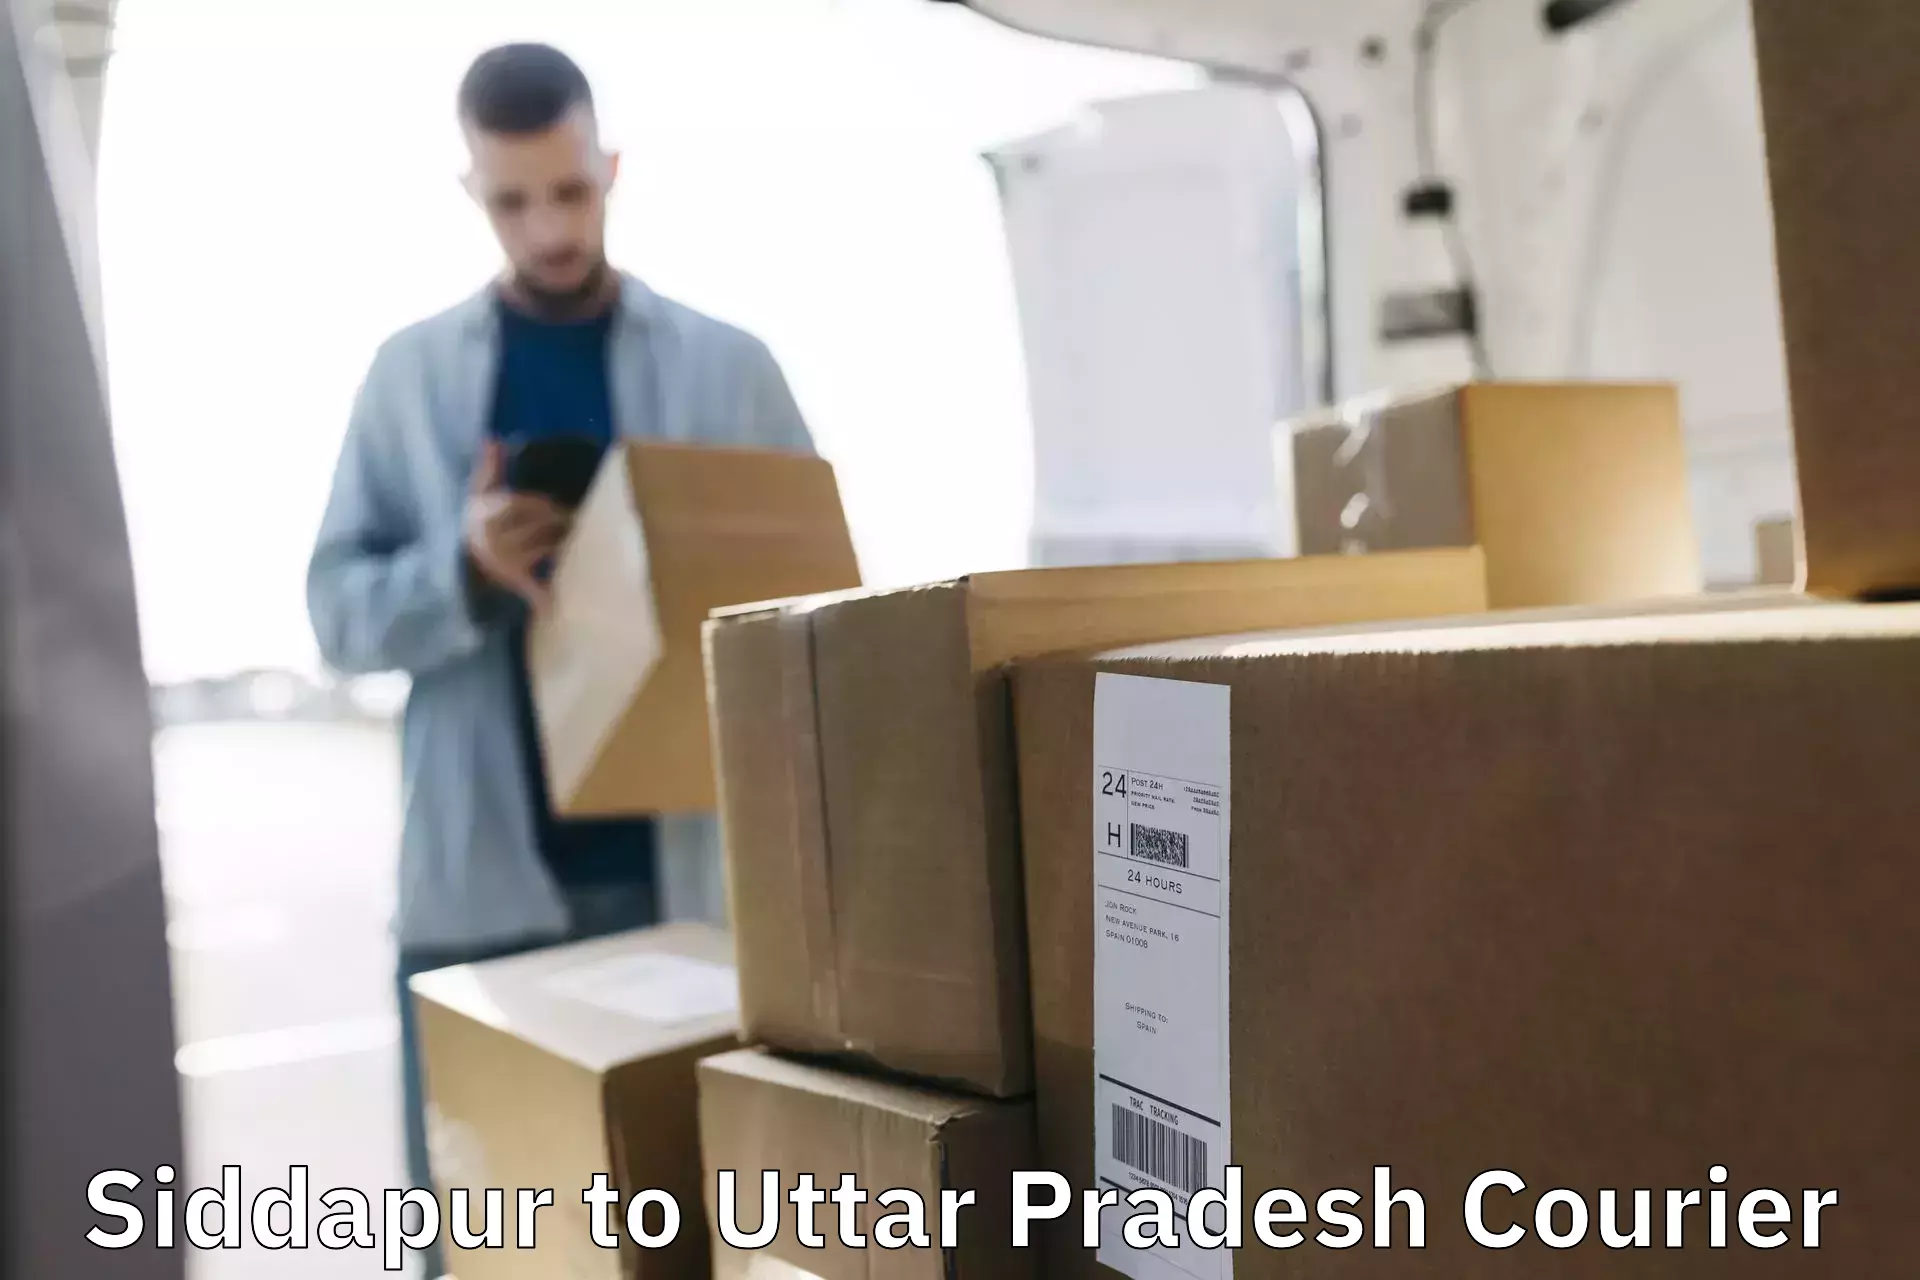 Courier service comparison Siddapur to Agra